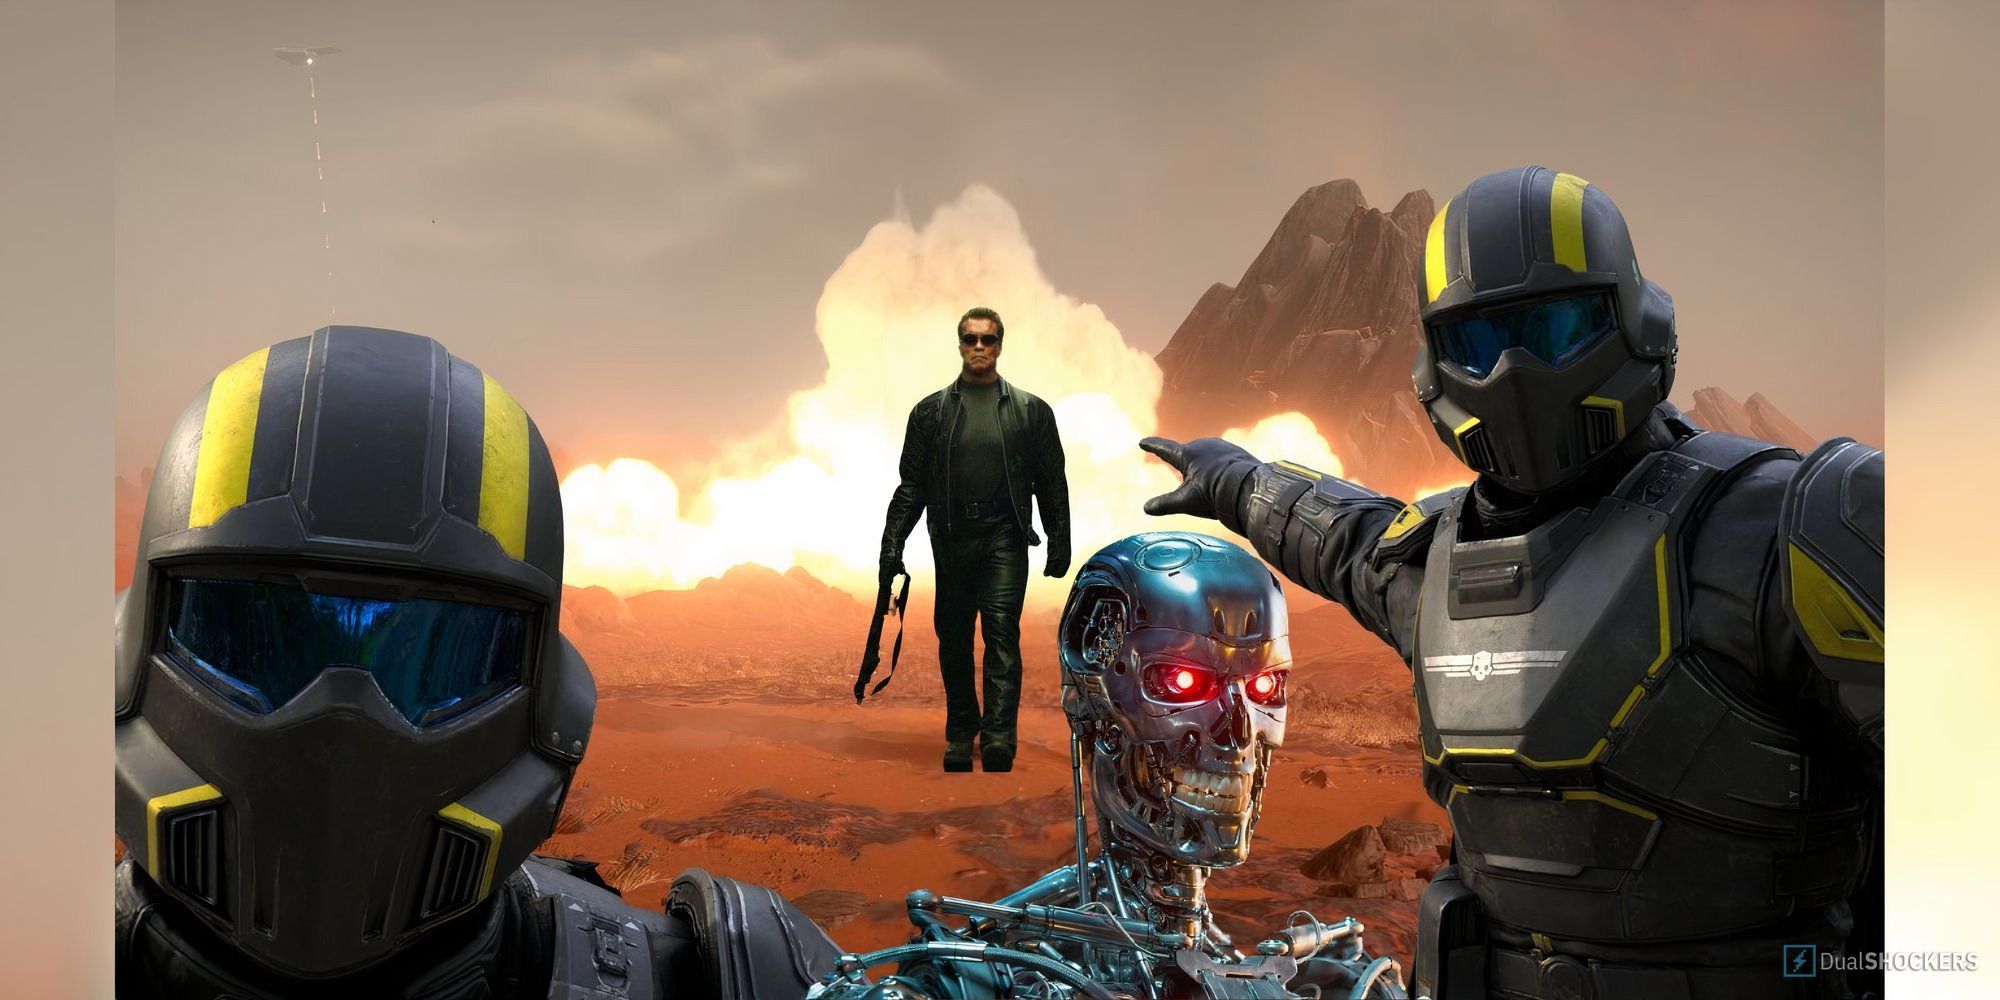 Feature image with two Helldivers from Helldivers 2 pointing at Arnold Schwarzenegger as the Terminator with another robot in the foreground.